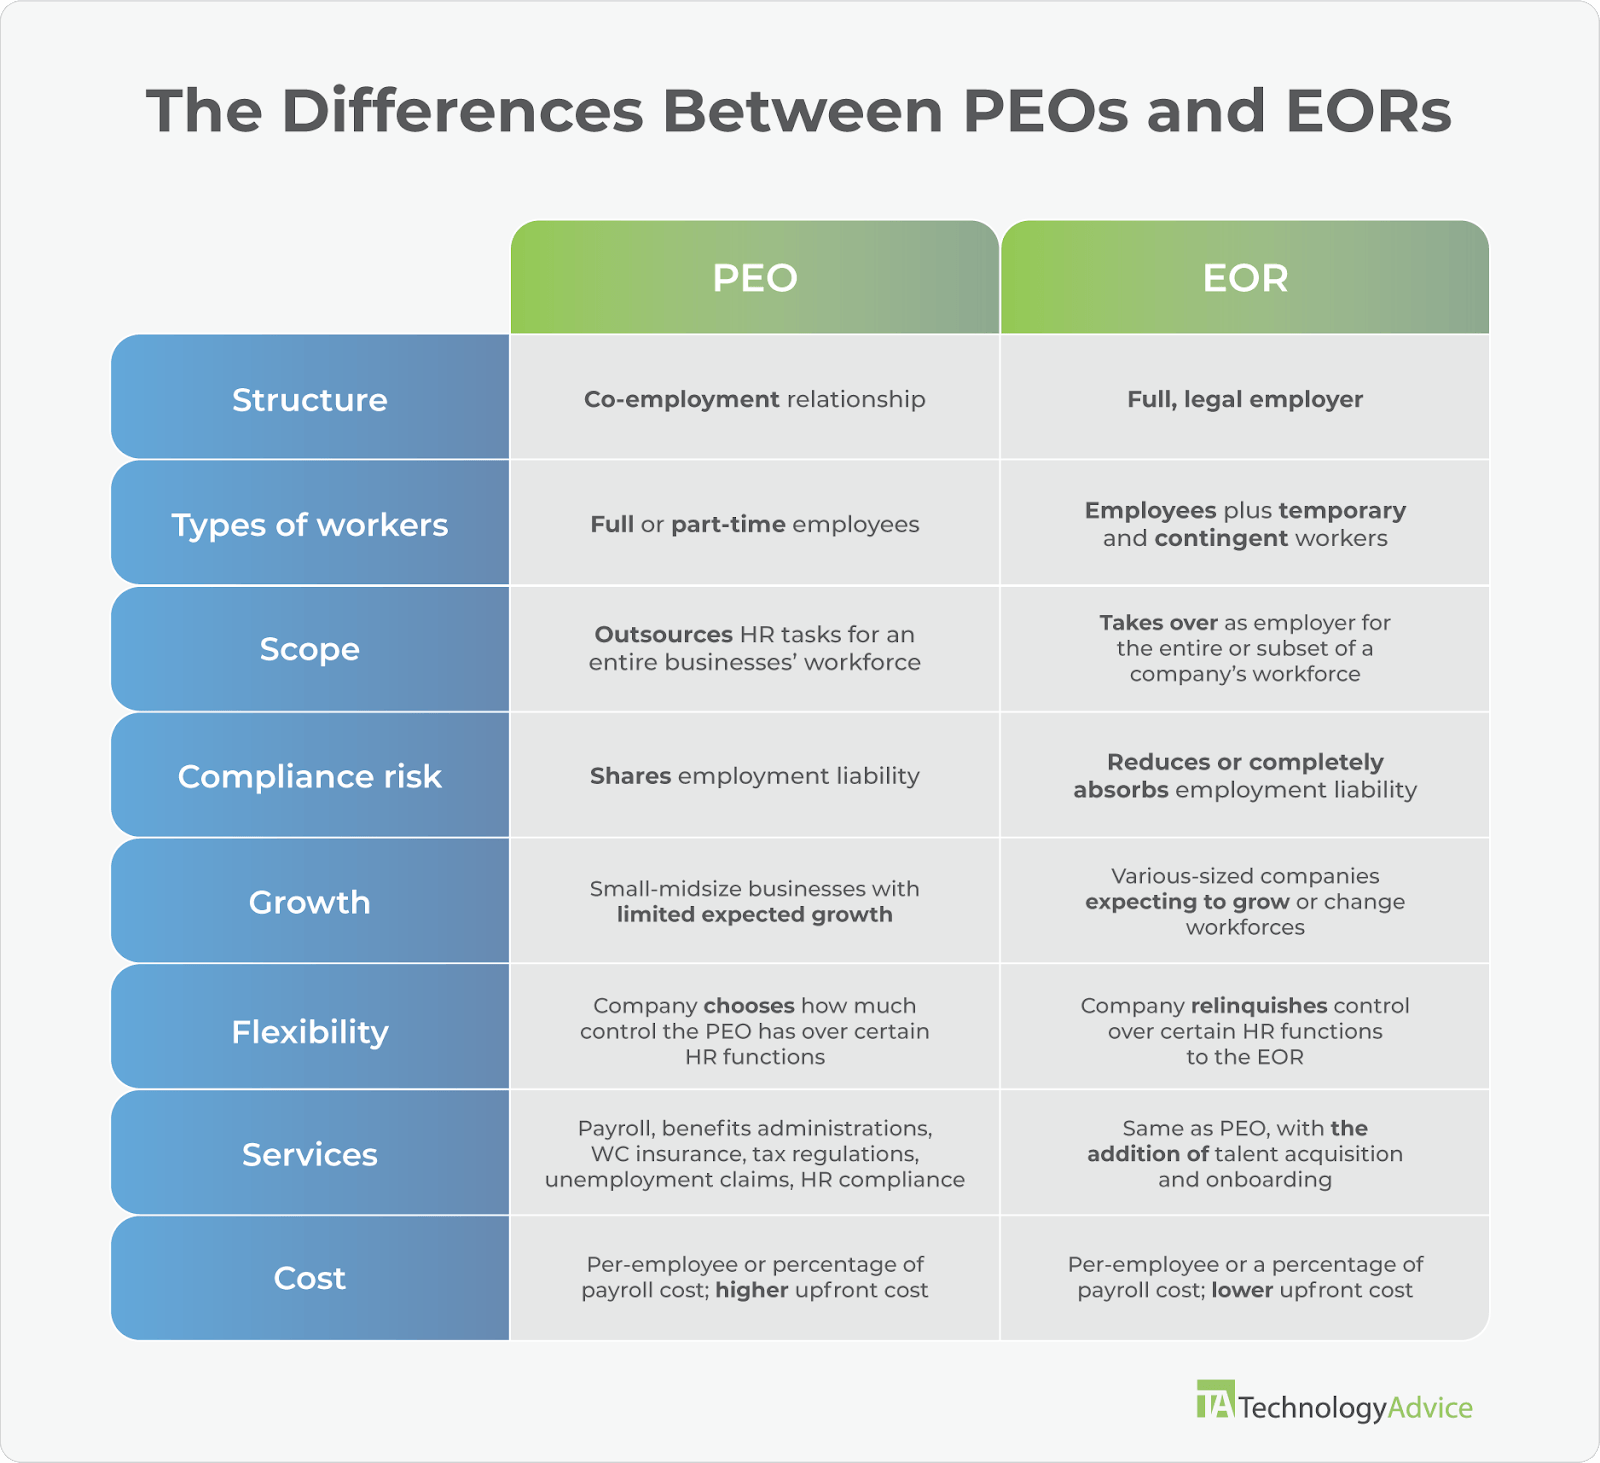 PEO vs EOR comparison table. Main differences include structure (PEO is a co-employment relationship, EOR is the legal employer); types of workers (PEO supports employees, EOR all worker types); scope (PEO outsources entire HR department, EOR takes over all or part of workforce); compliance risk (PEO shares employment liability, EOR reduces or absorbs it); growth (PEO is for small businesses with limited growth, EOR for various-sized companies and growth plans); flexibility (PEO allows companies to choose amount of control over HR functions, EOR does not); services (PEO handles payroll, benefits, workers’ compensation, tax regulations, unemployment claims, and HR compliance; EOR handles those plus talent acquisition and onboarding); cost (PEO higher upfront cost, EOR lower upfront cost).